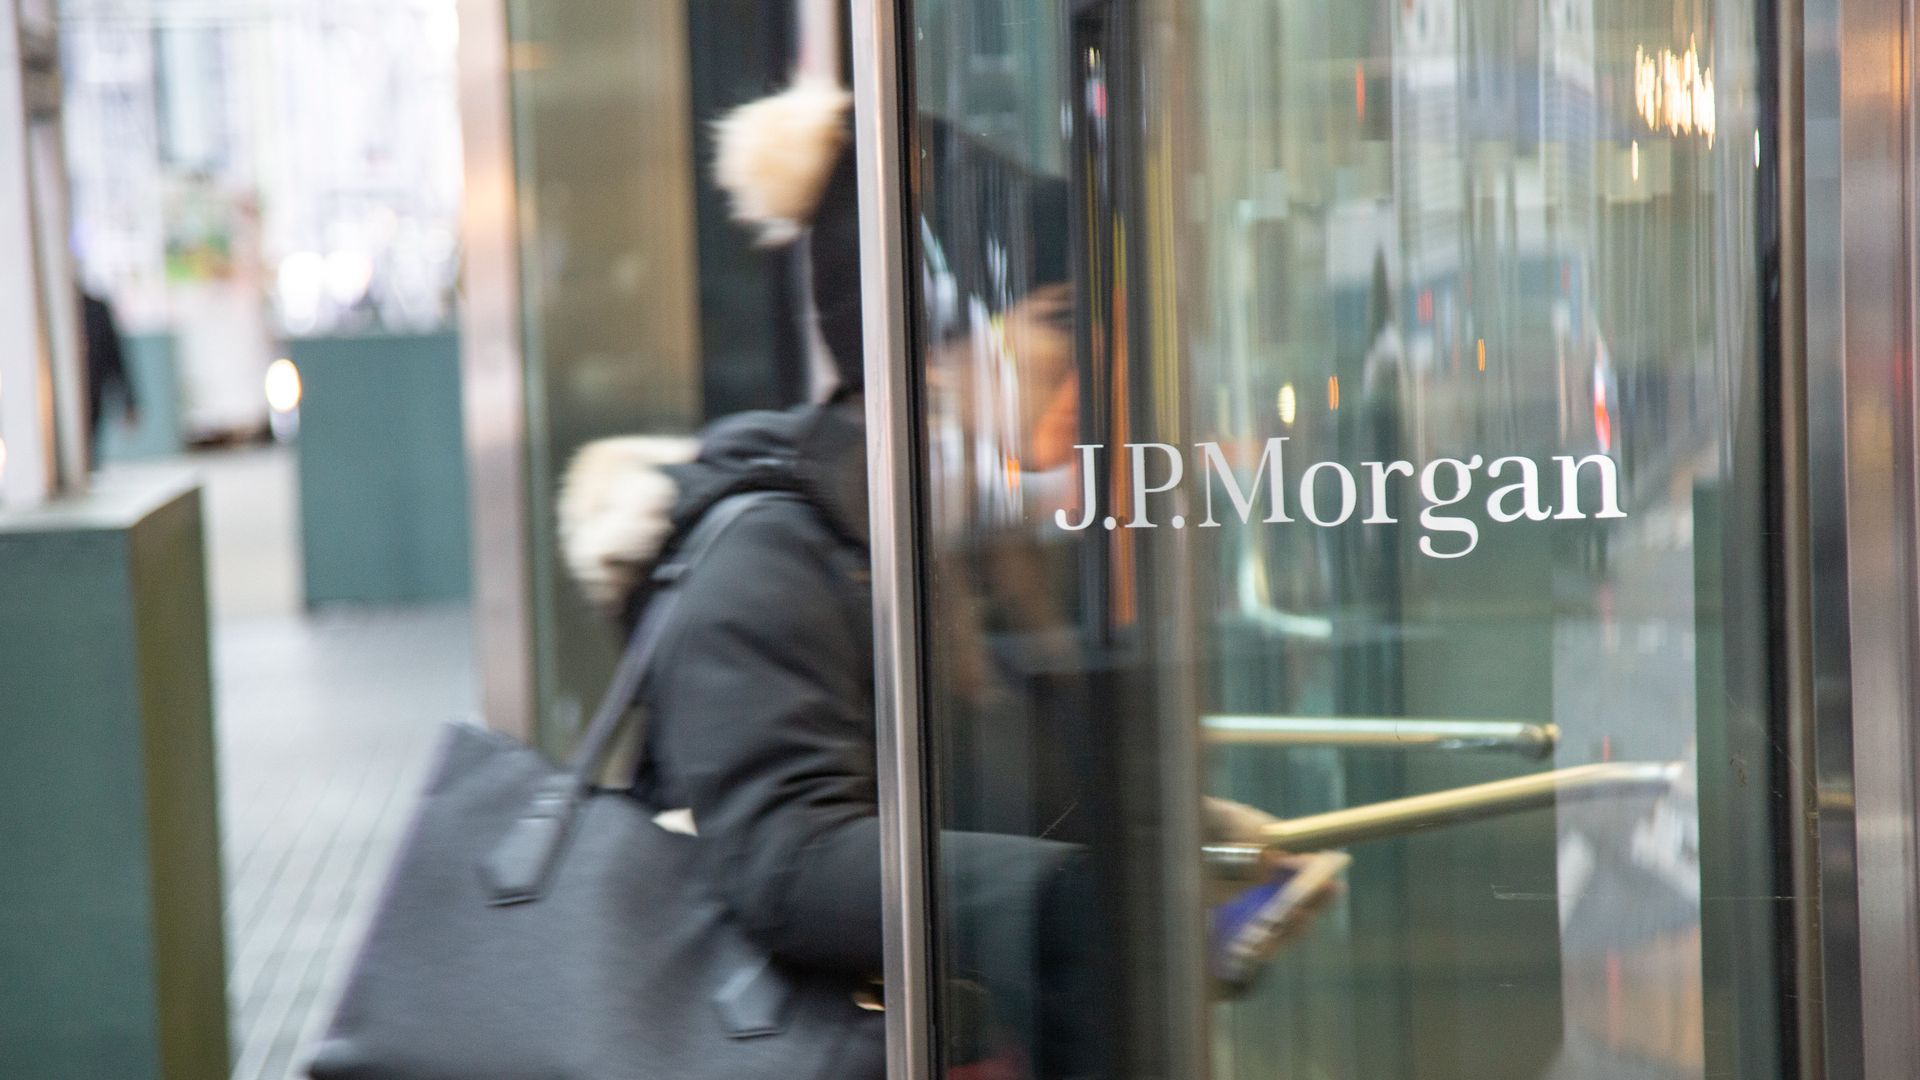 Photo of a masked person entering a glass revolving door that shows the JPMorgan logo 